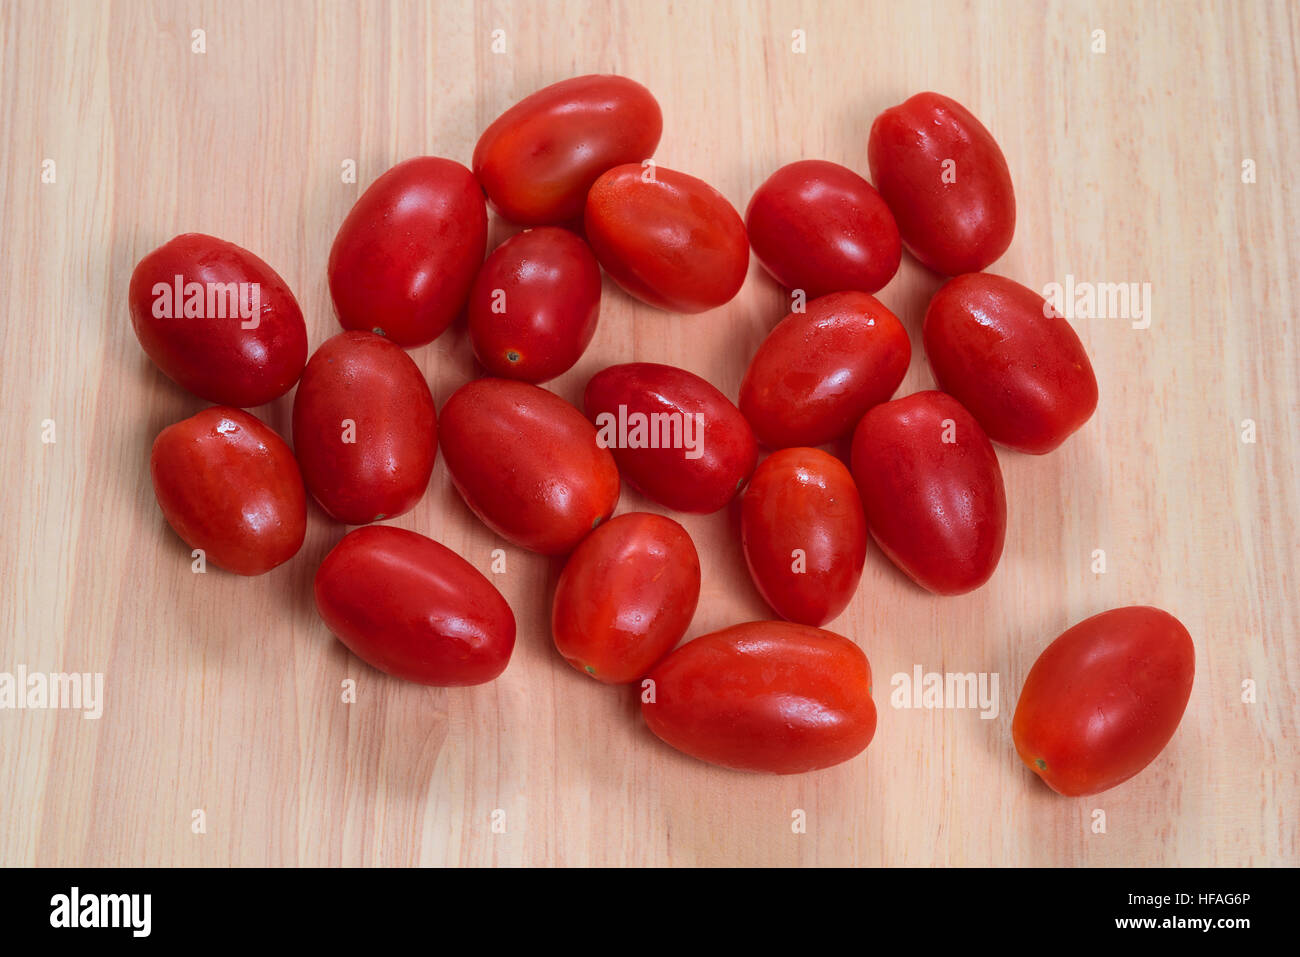 Group of plum tomatoes, shot from above. Stock Photo